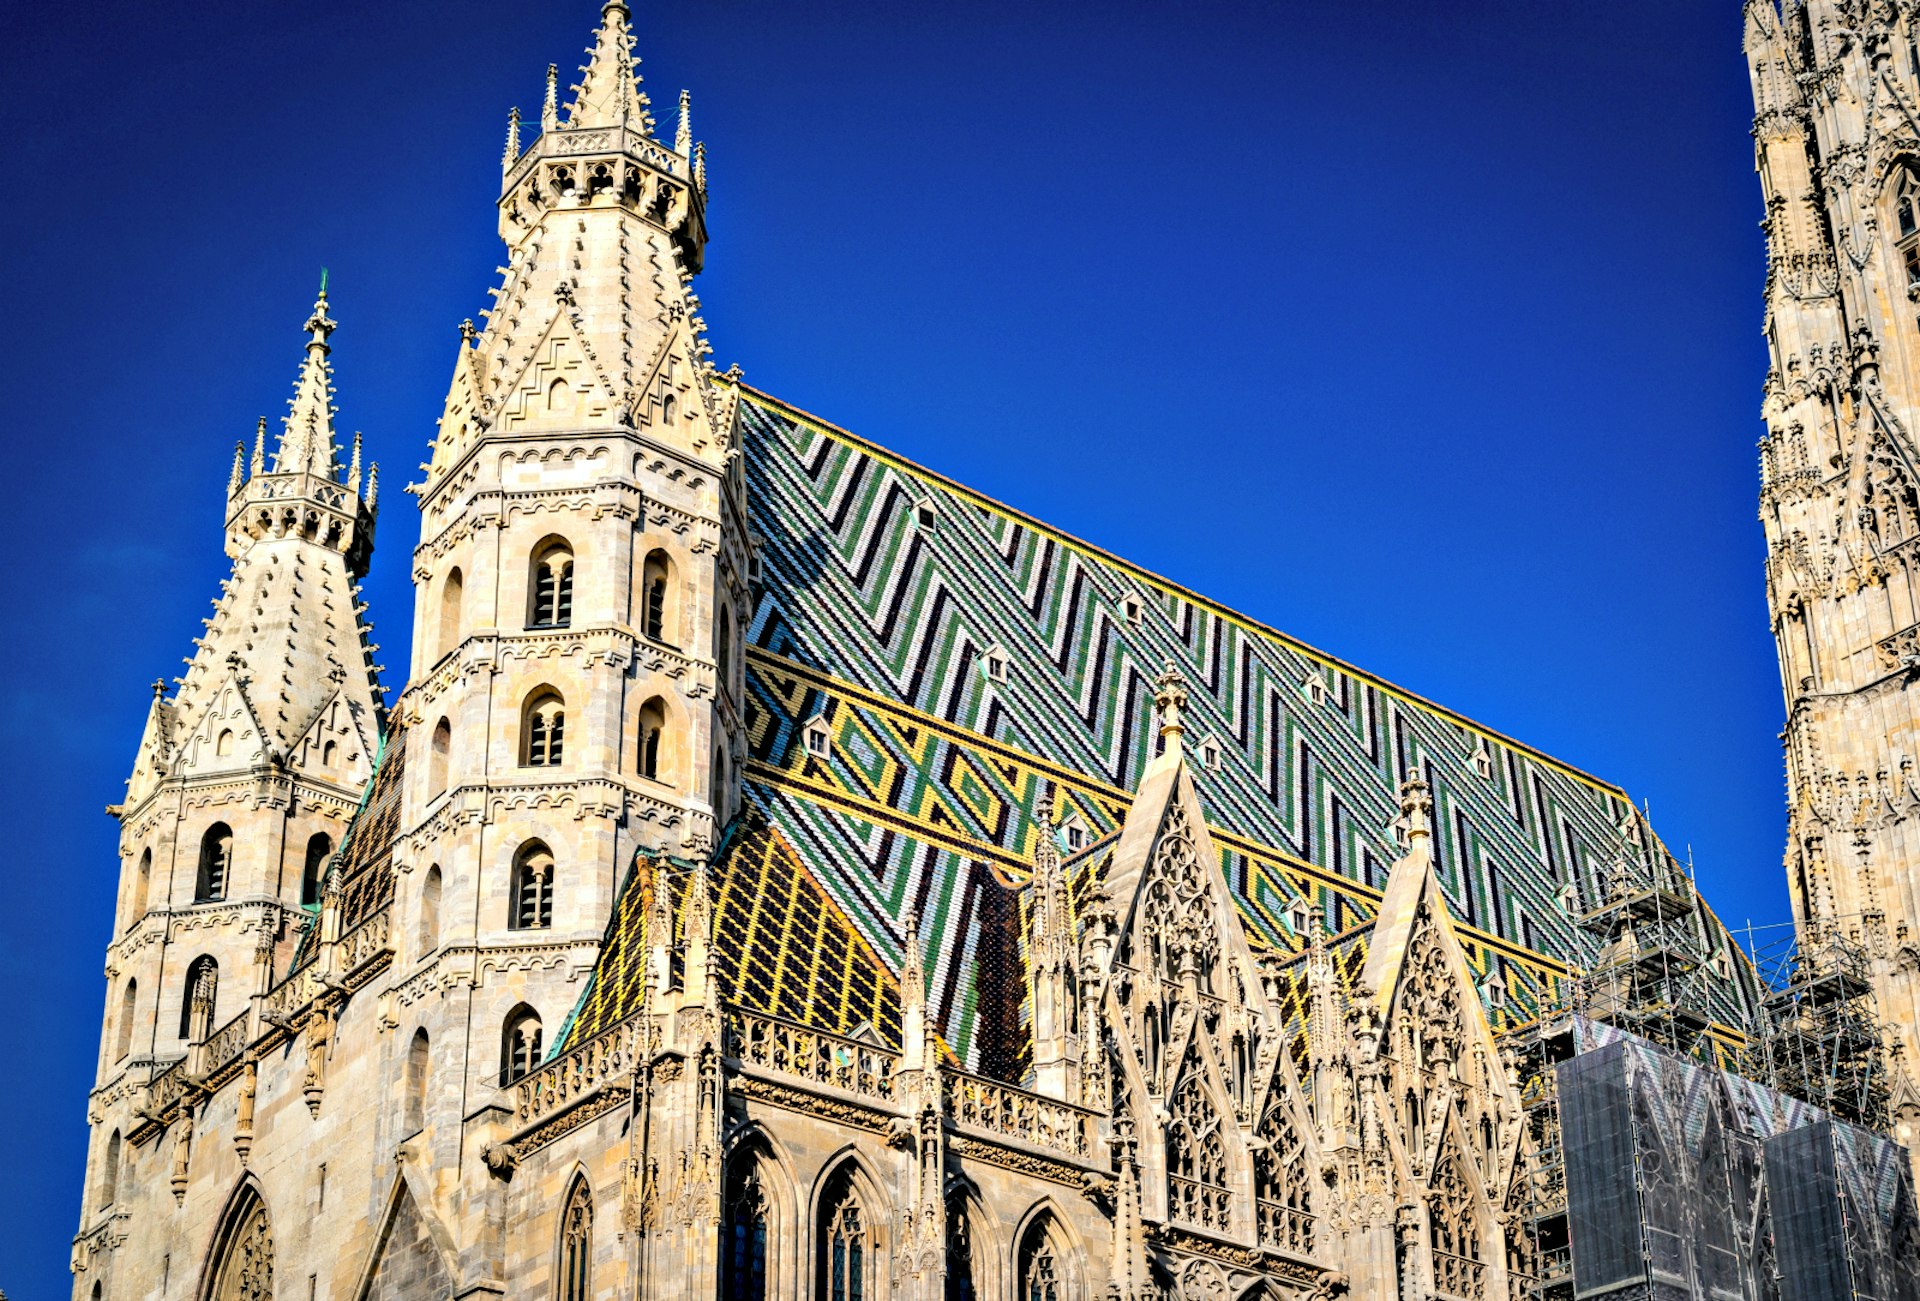 The Stephansdom cathedral roof in Vienna